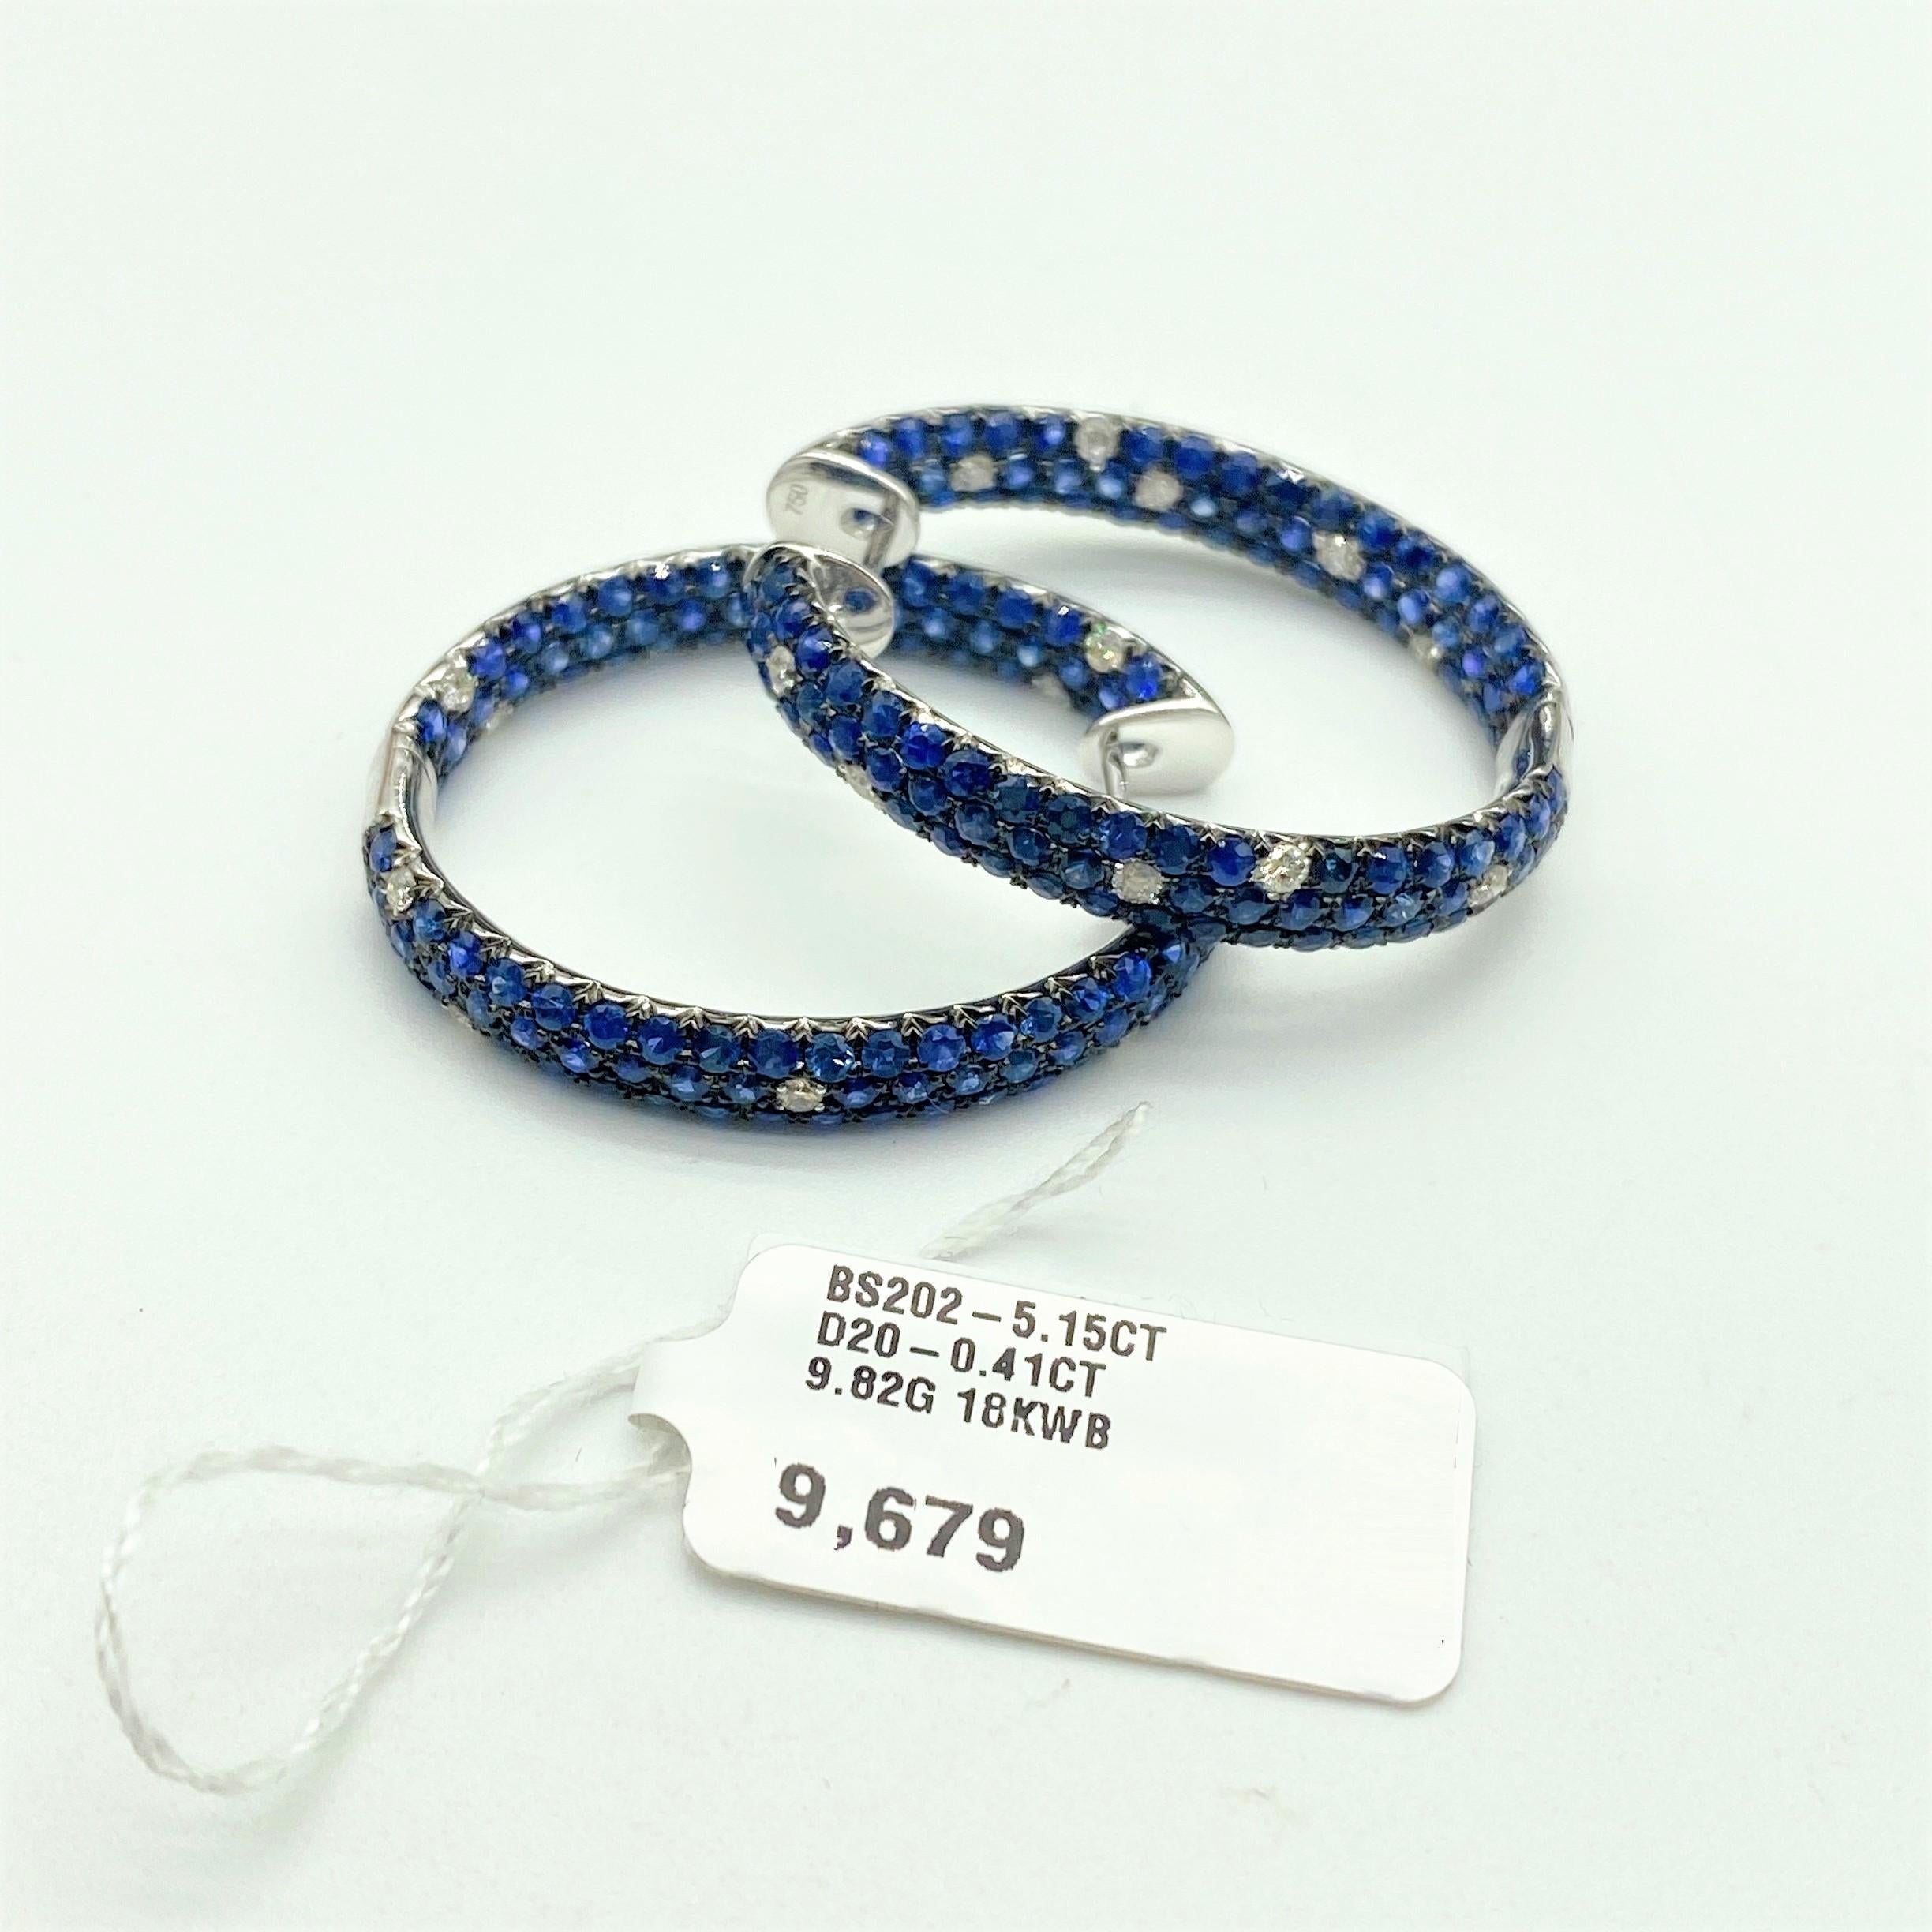 $9, 679 Exquisite 18KT Magnificent Fancy Blue Sapphire Diamond Hoop Earring In New Condition For Sale In New York, NY